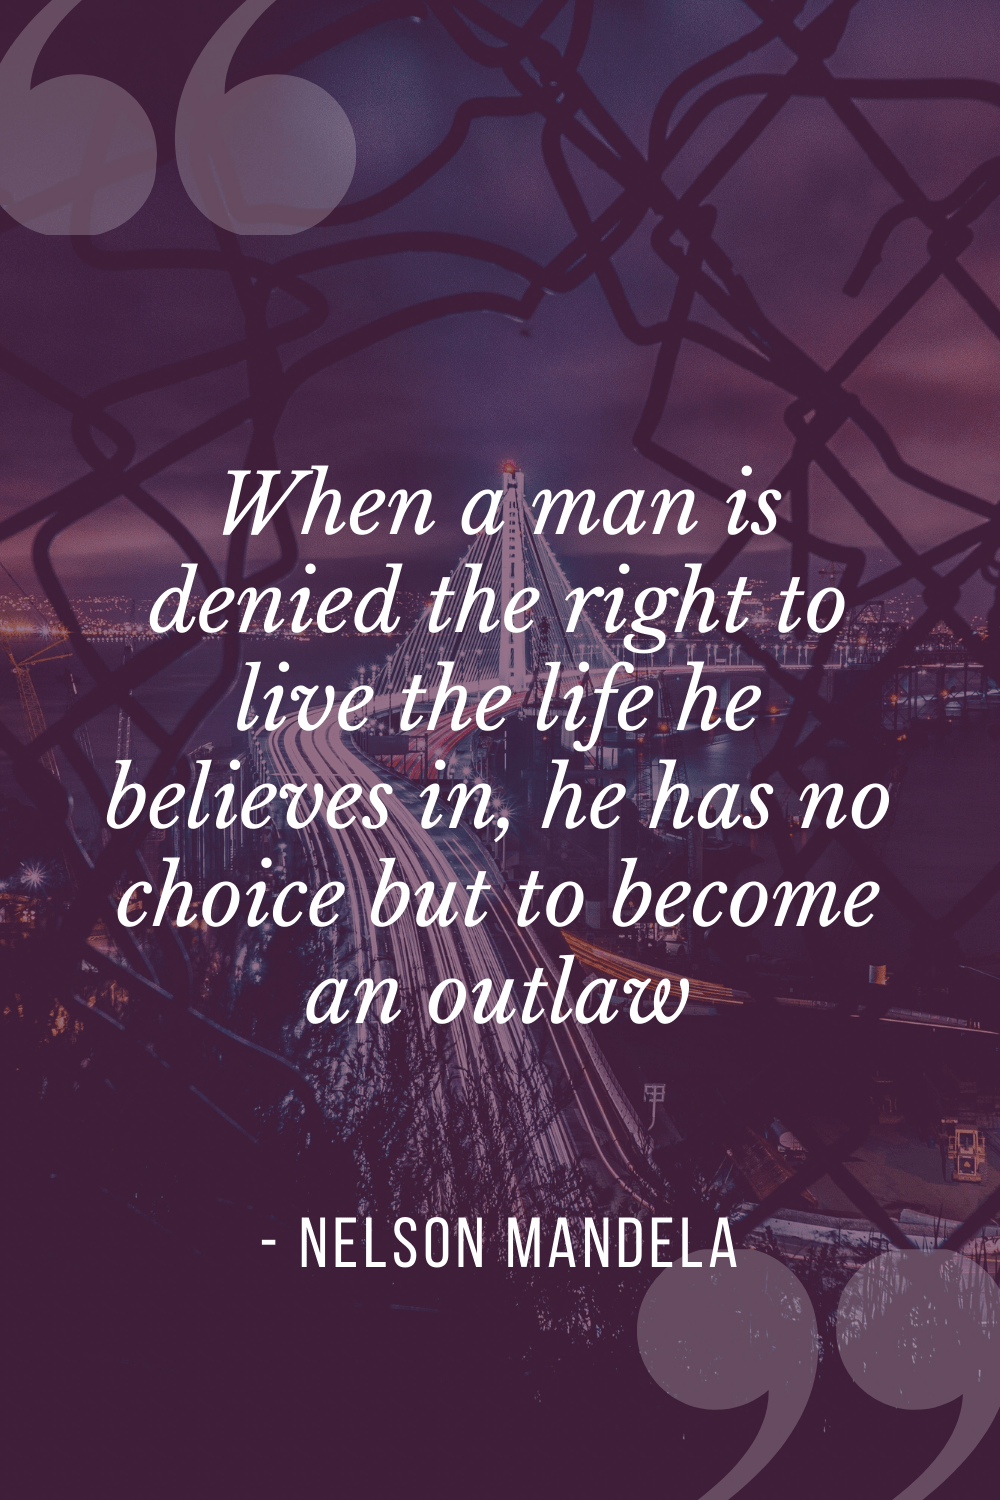 “When a man is denied the right to live the life he believes in, he has no choice but to become an outlaw”, Nelson Mandela